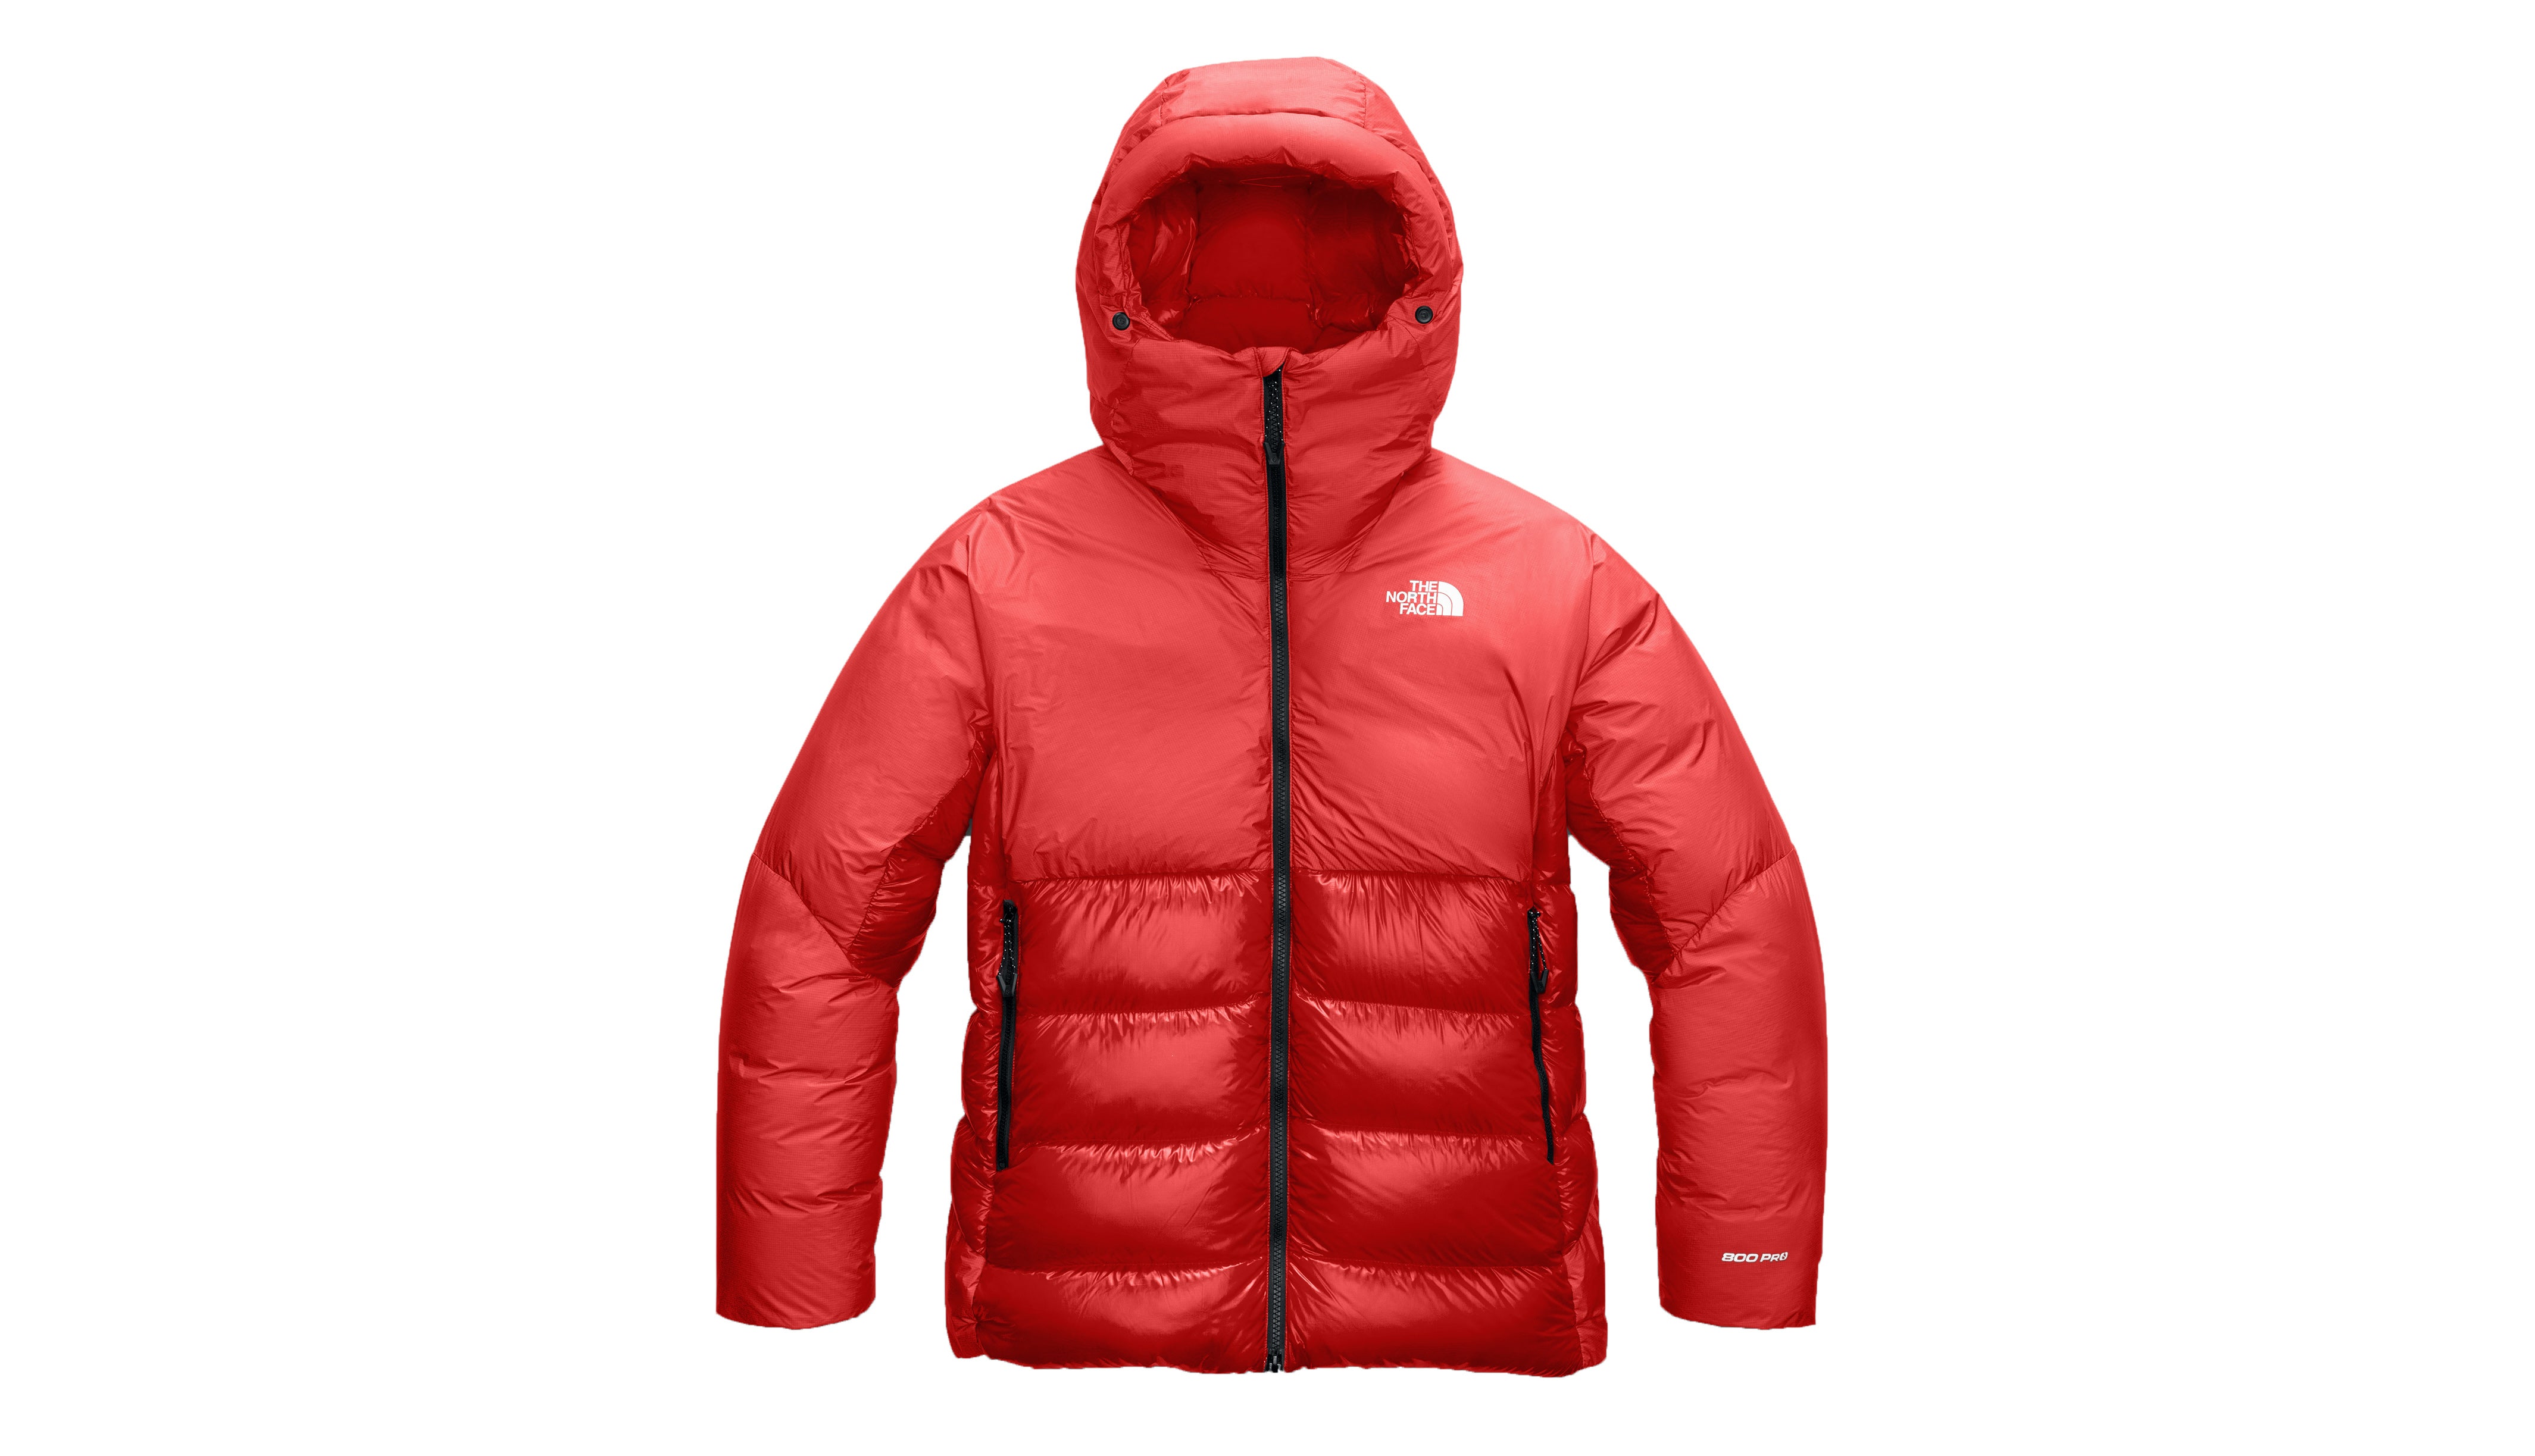 Gear Guide 2020: The North Face Summit L6 Down Belay Parka Review